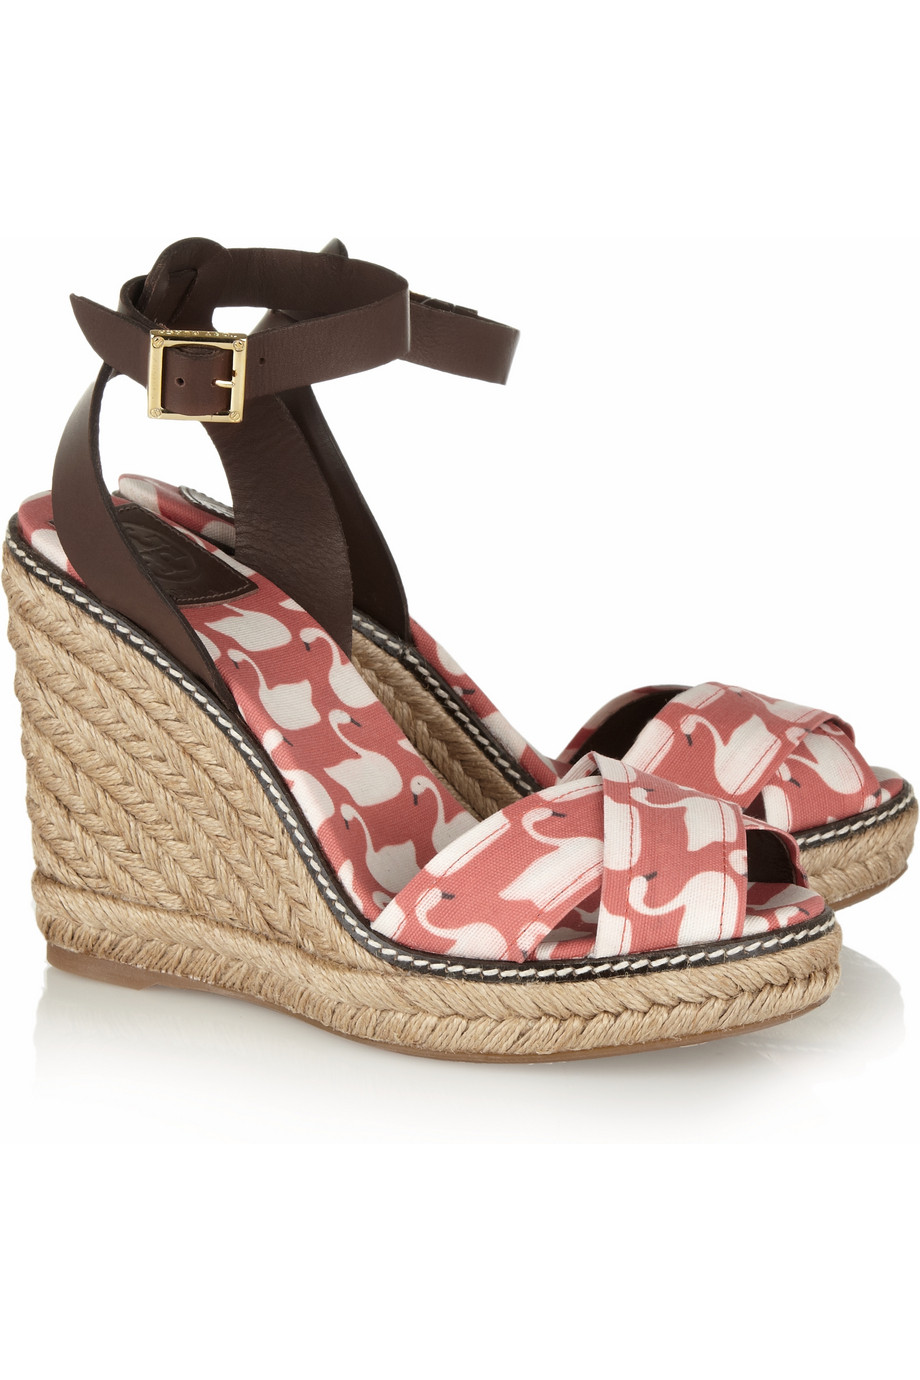 Lyst - Tory Burch Printed Canvas Wedge Sandals in Red